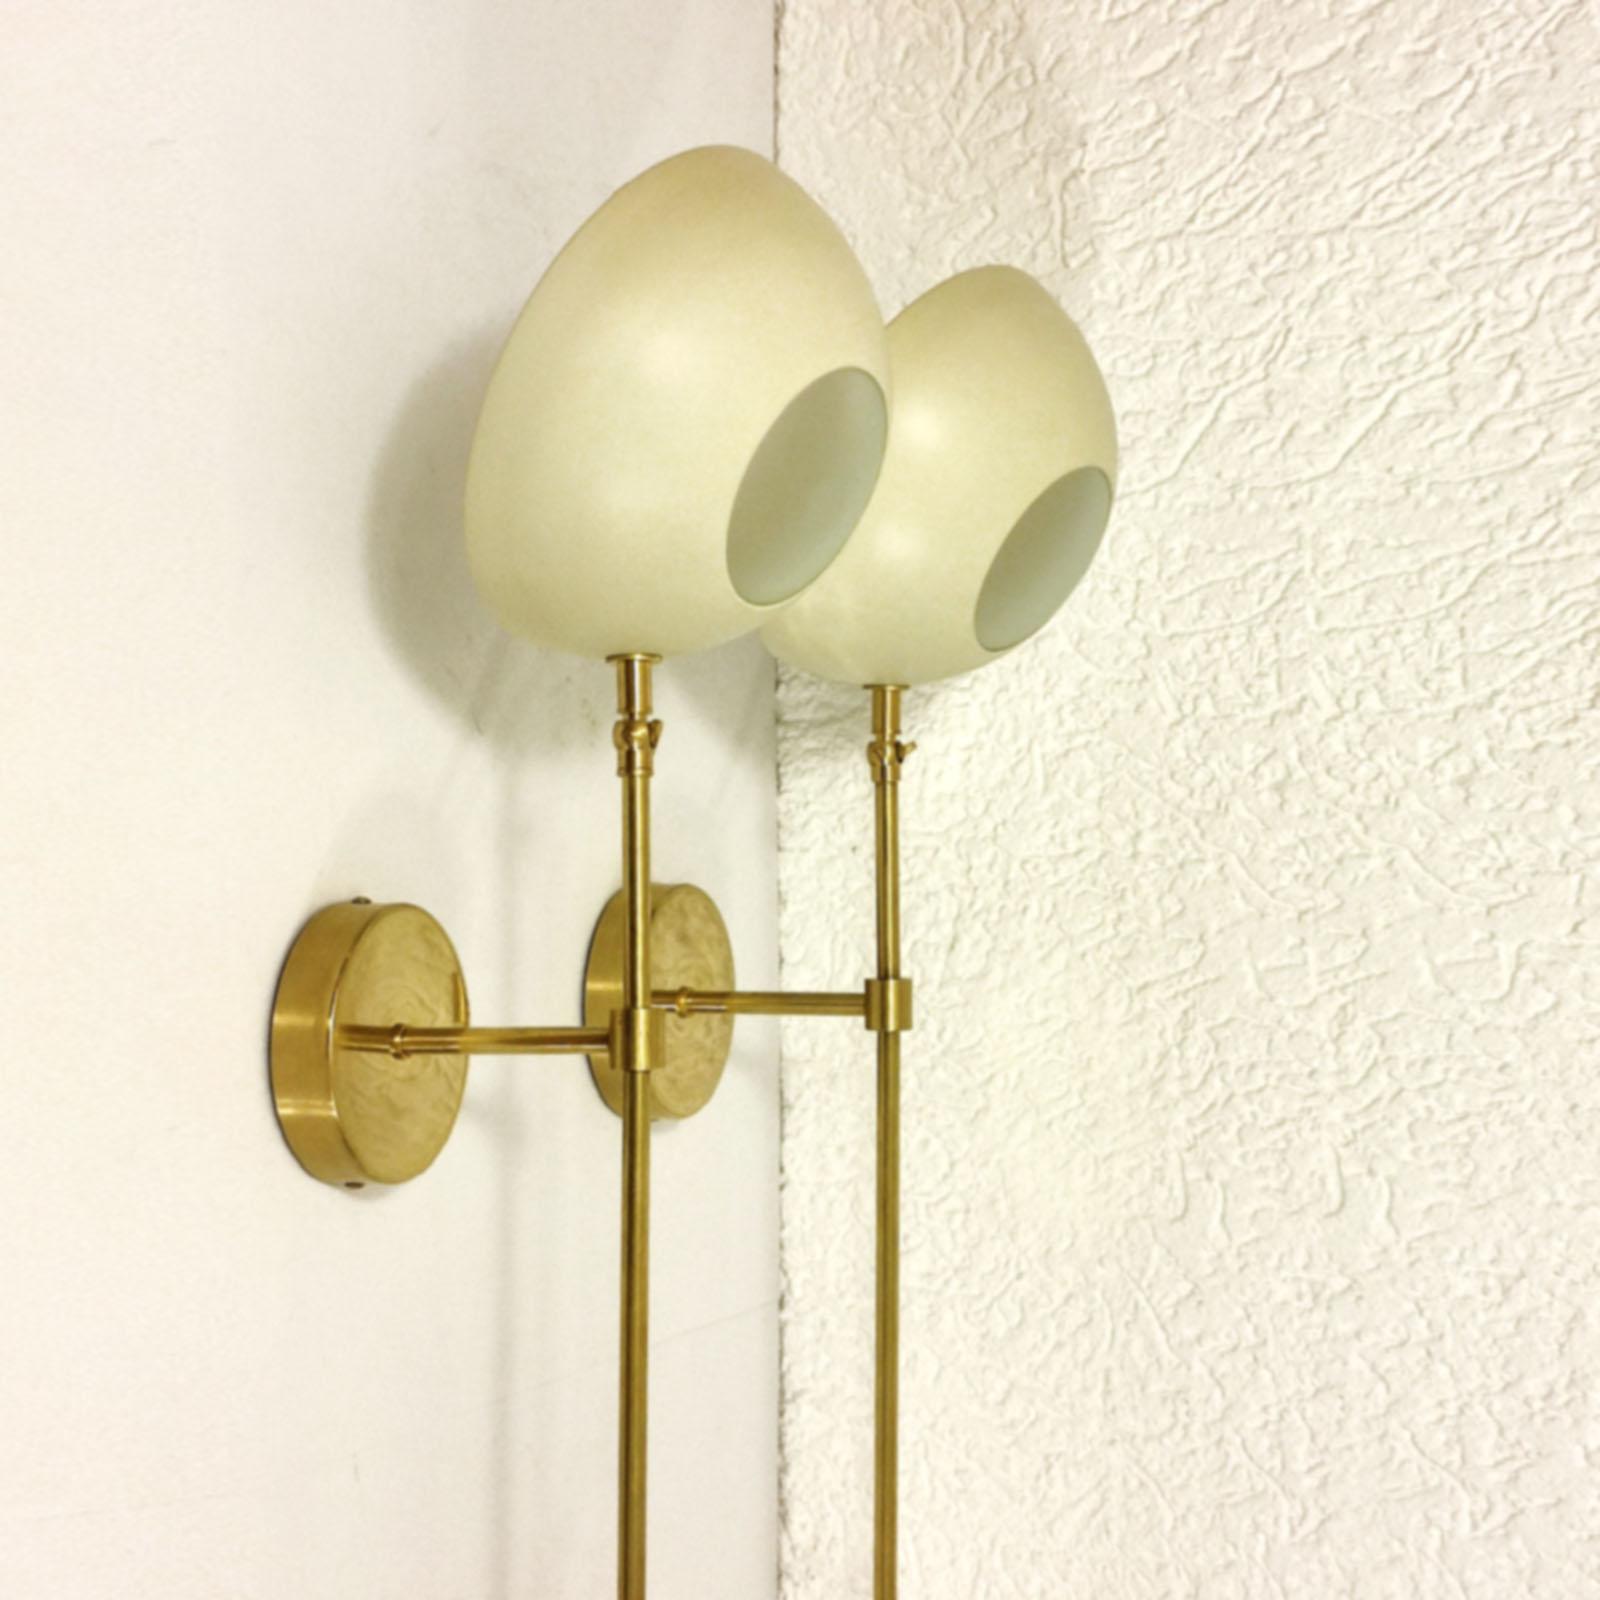 Pair of Italian Wall Lights, Brass and Ivory Lacquer, Stilnovo Style For Sale 5